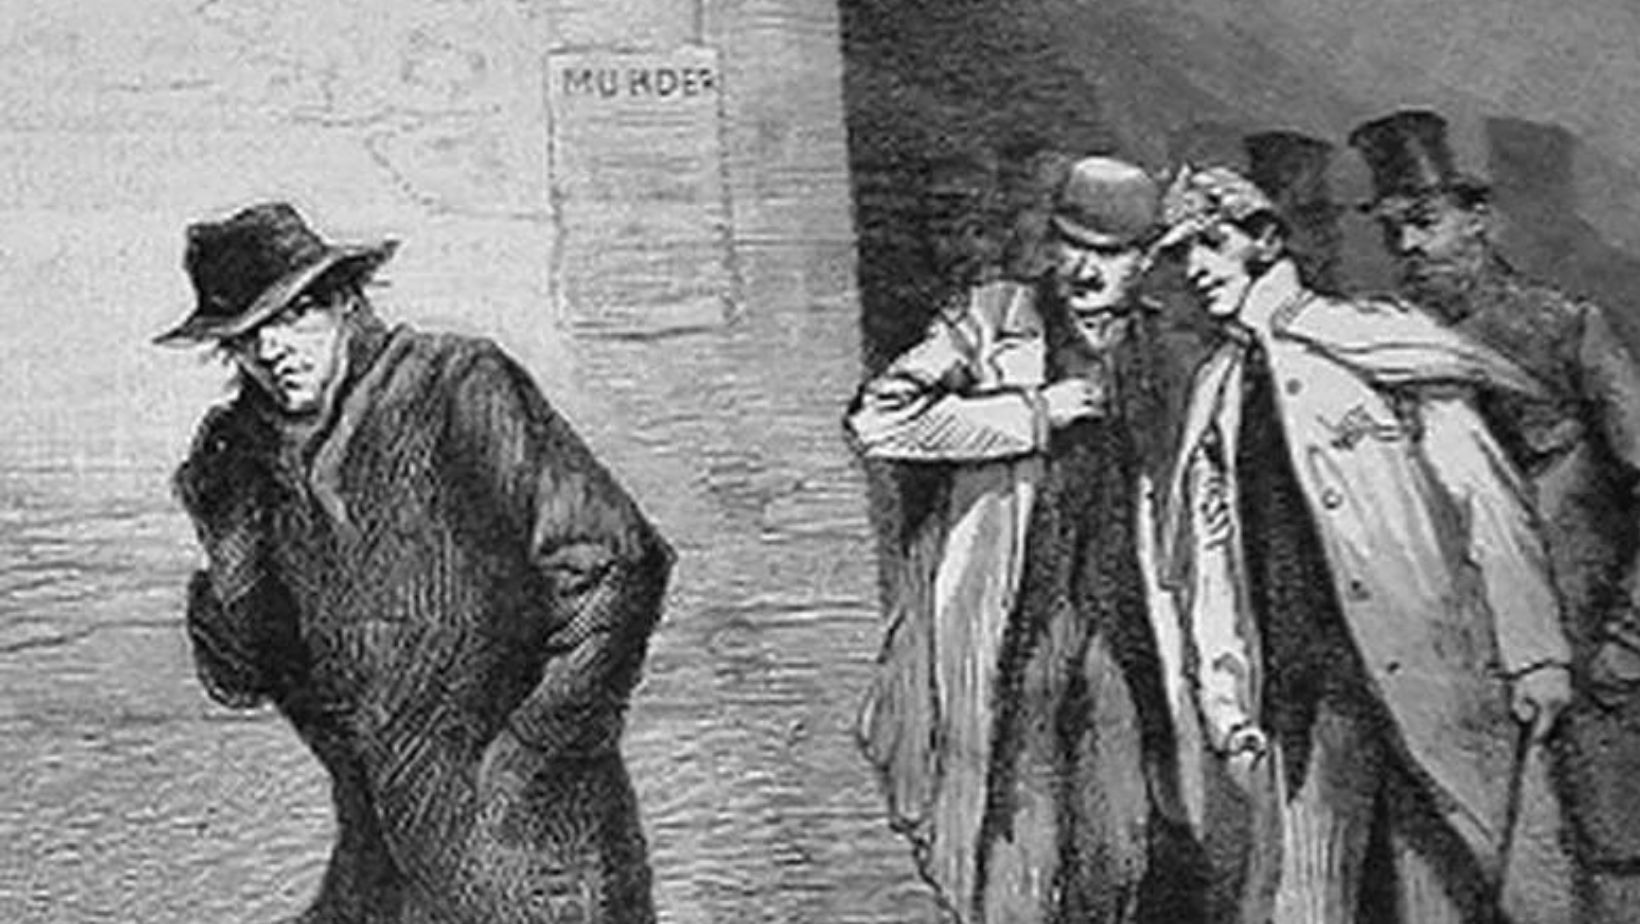 Jack the Ripper suspects and theories